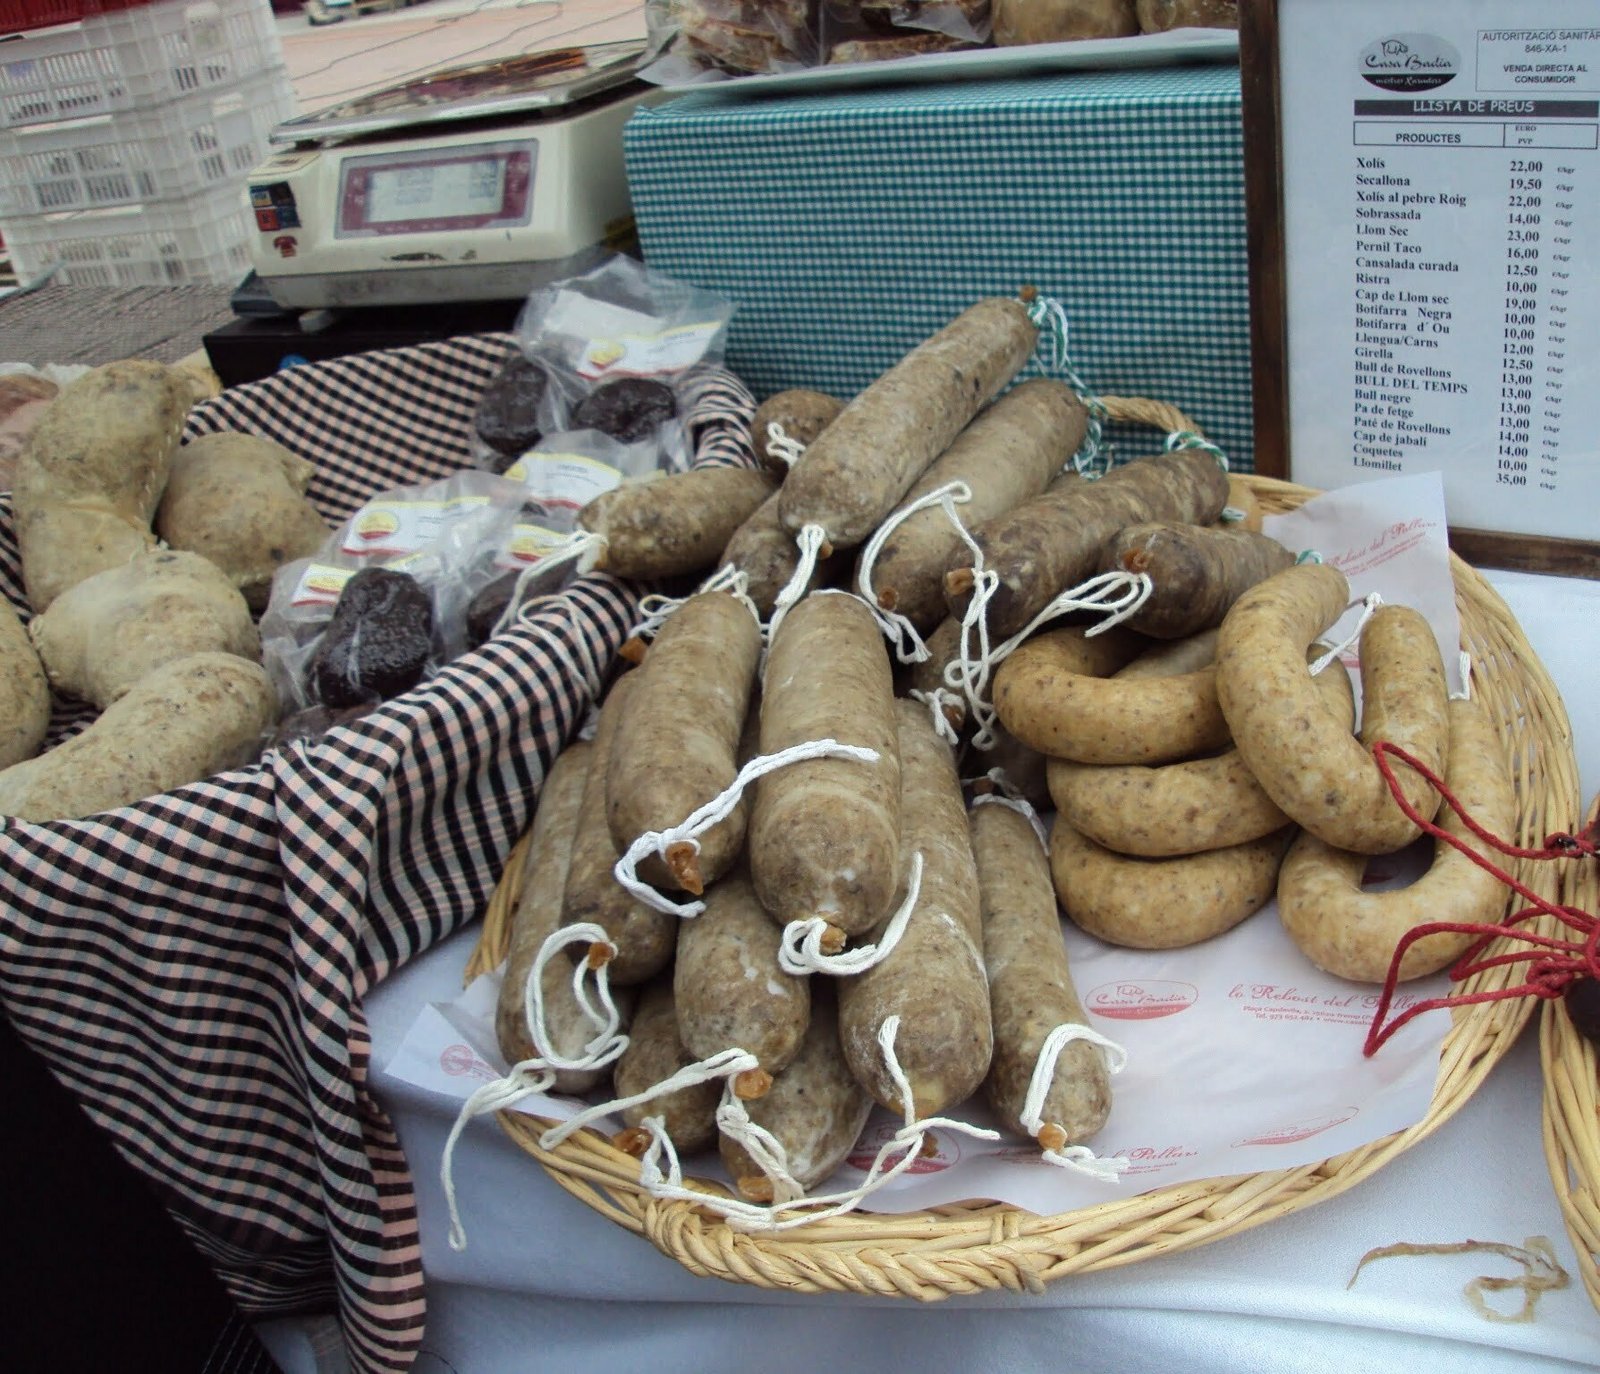 Butifarra sausages sits in a market stall